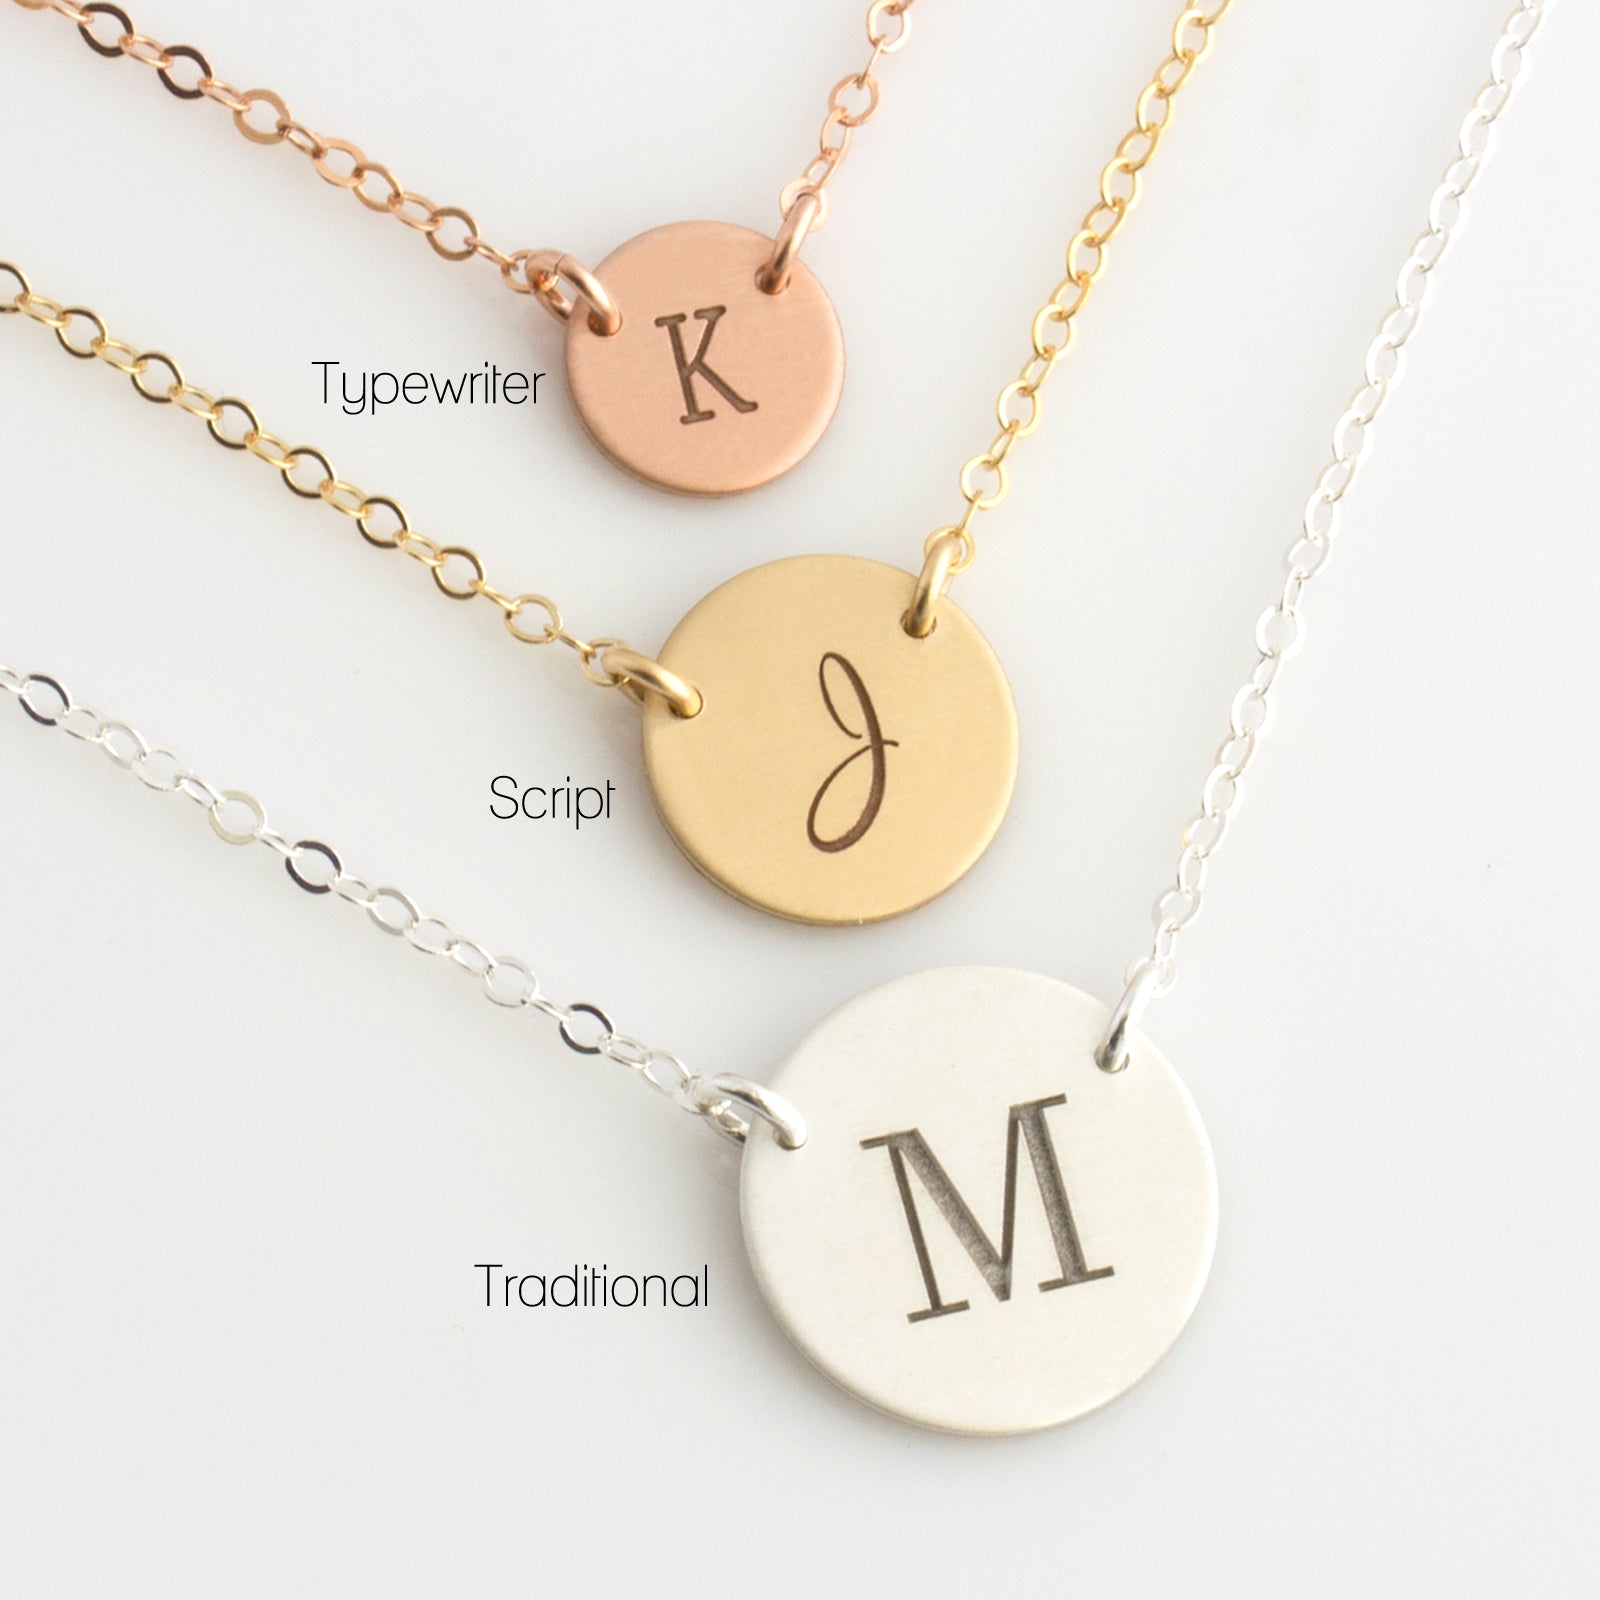 Dainty Engraved Disc Necklace, Personalized Disc Necklace, Engraved Monogram Necklace, 14K Gold Fill, Mothers Day Gift, LEILAJewelryShop